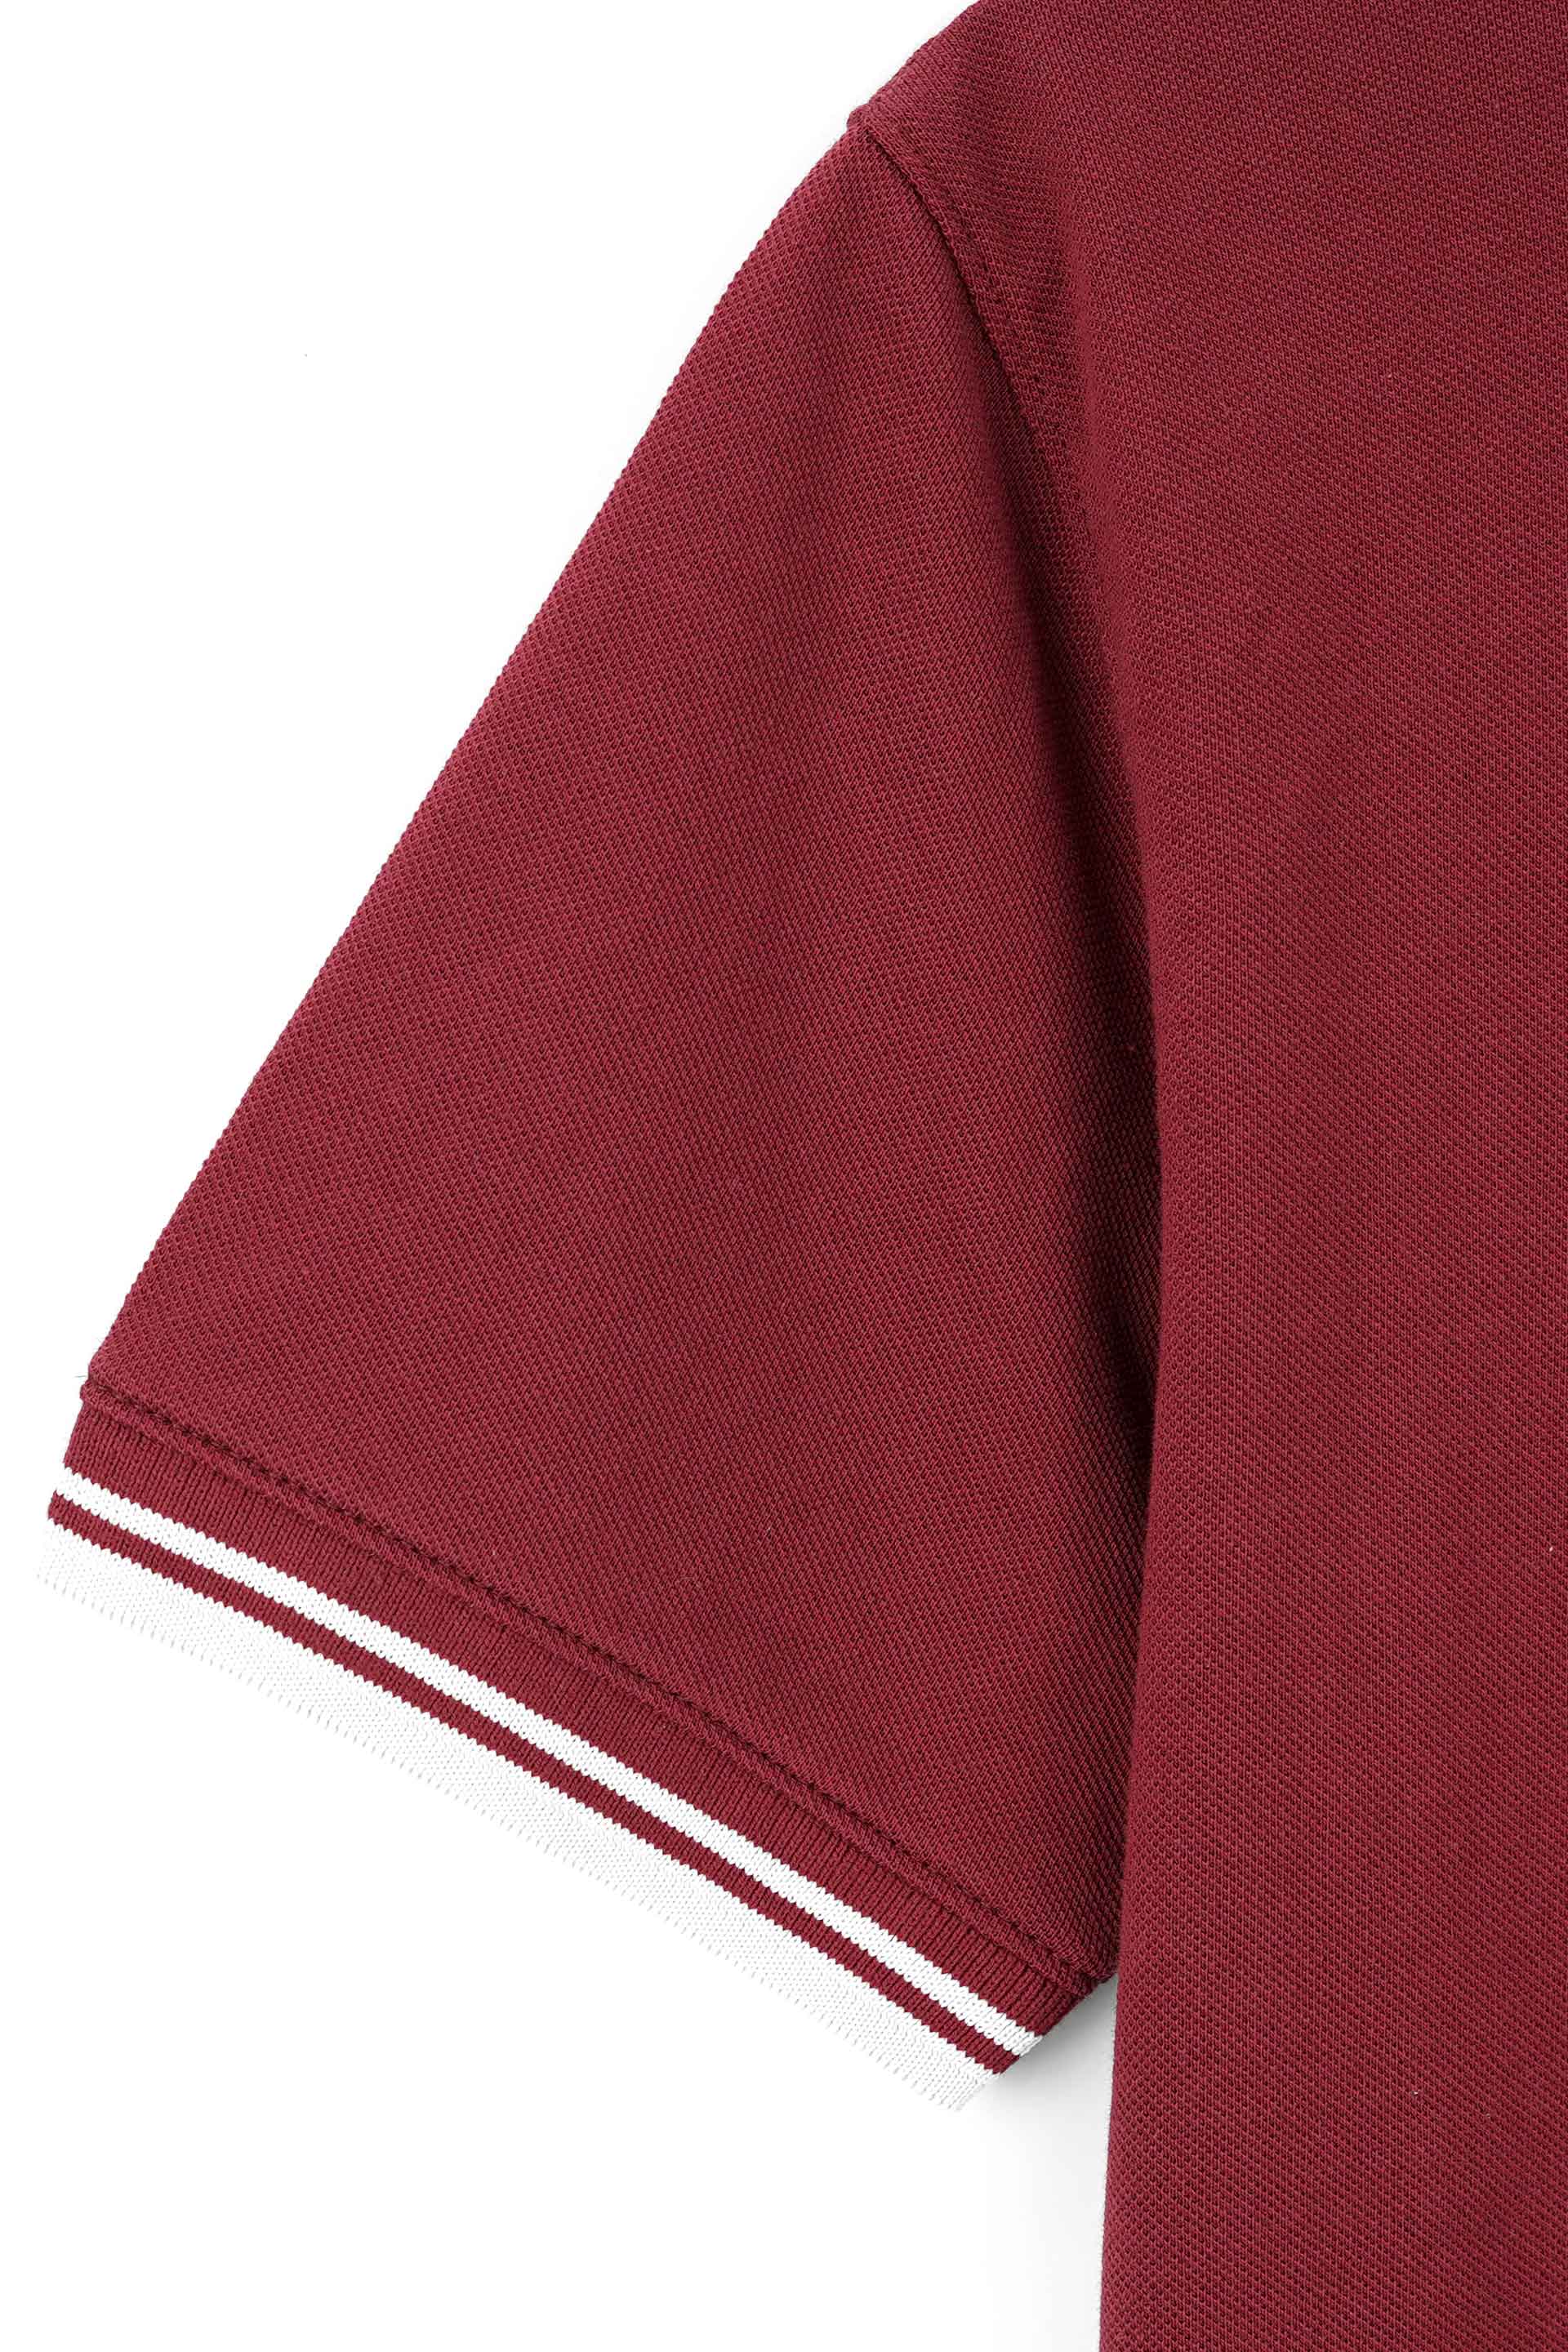 Embroidered Maroon Pique Polo Shirt 002479